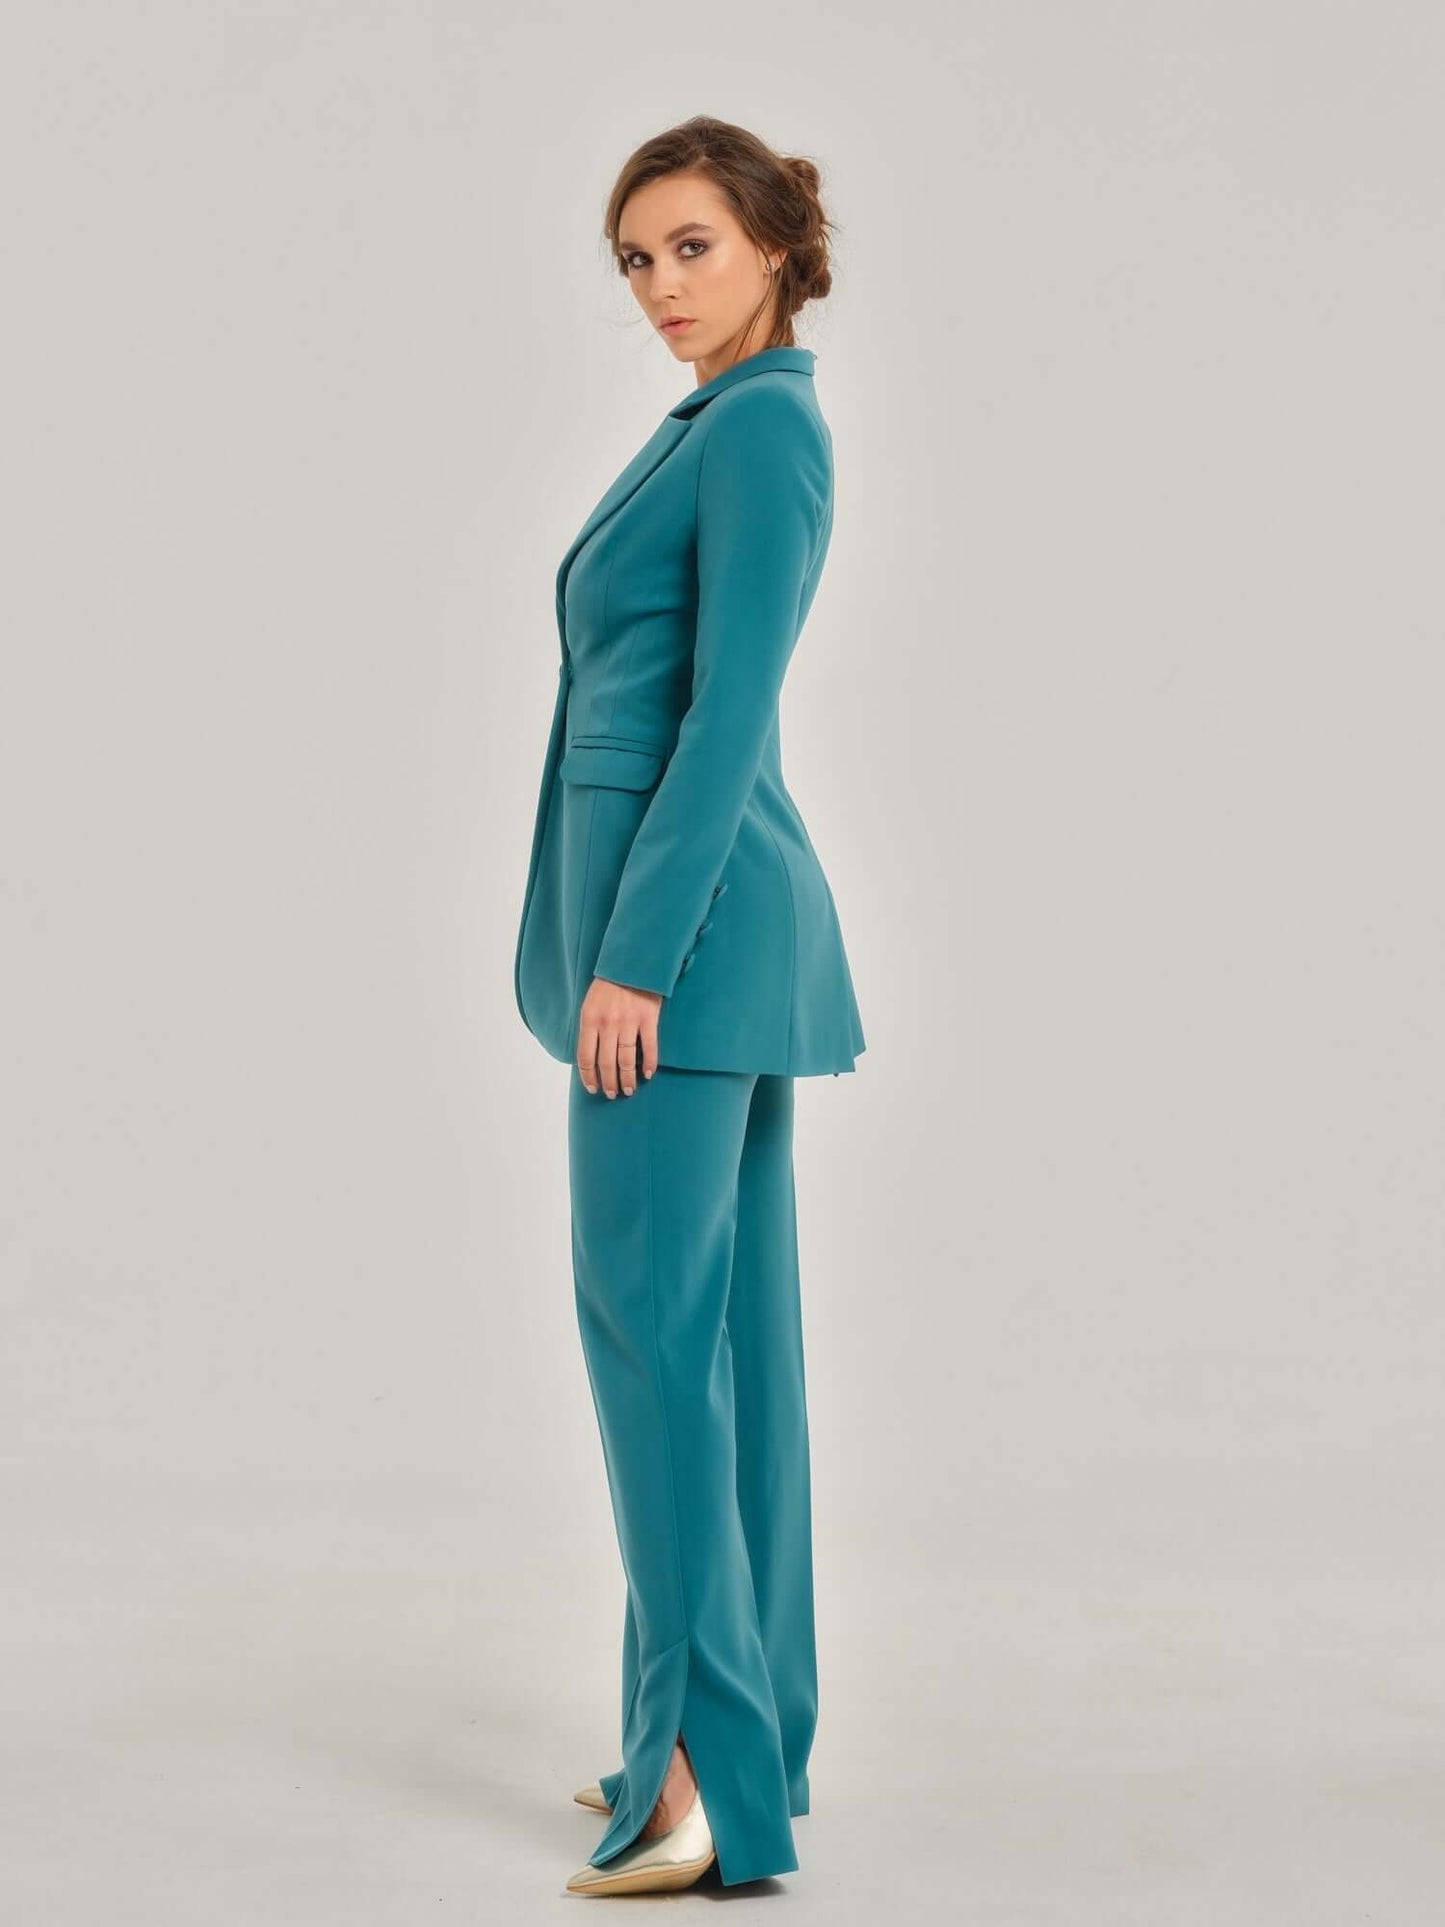 Tia Dorraine Magic Hour Wide-Leg Trousers Sharply tailored to inject ensembles with confidence, these pants reinterpret the classic palazzo pair with a polished edge and will fit perfectly in your capsule wardrobe. Expect a fusion of classic sophisticatio